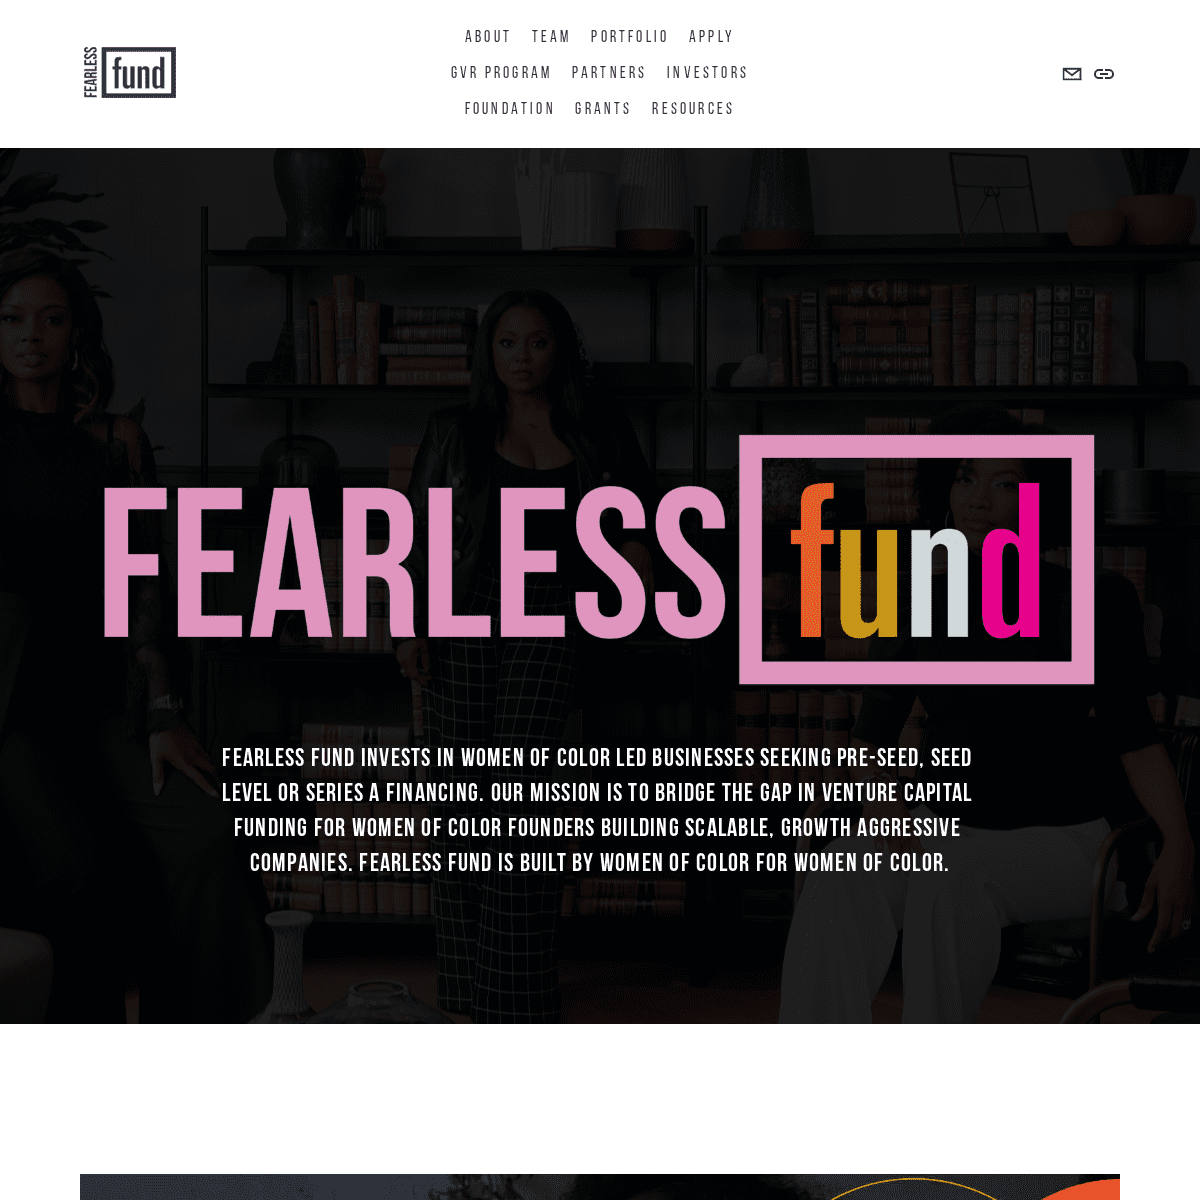 A complete backup of https://fearless.fund